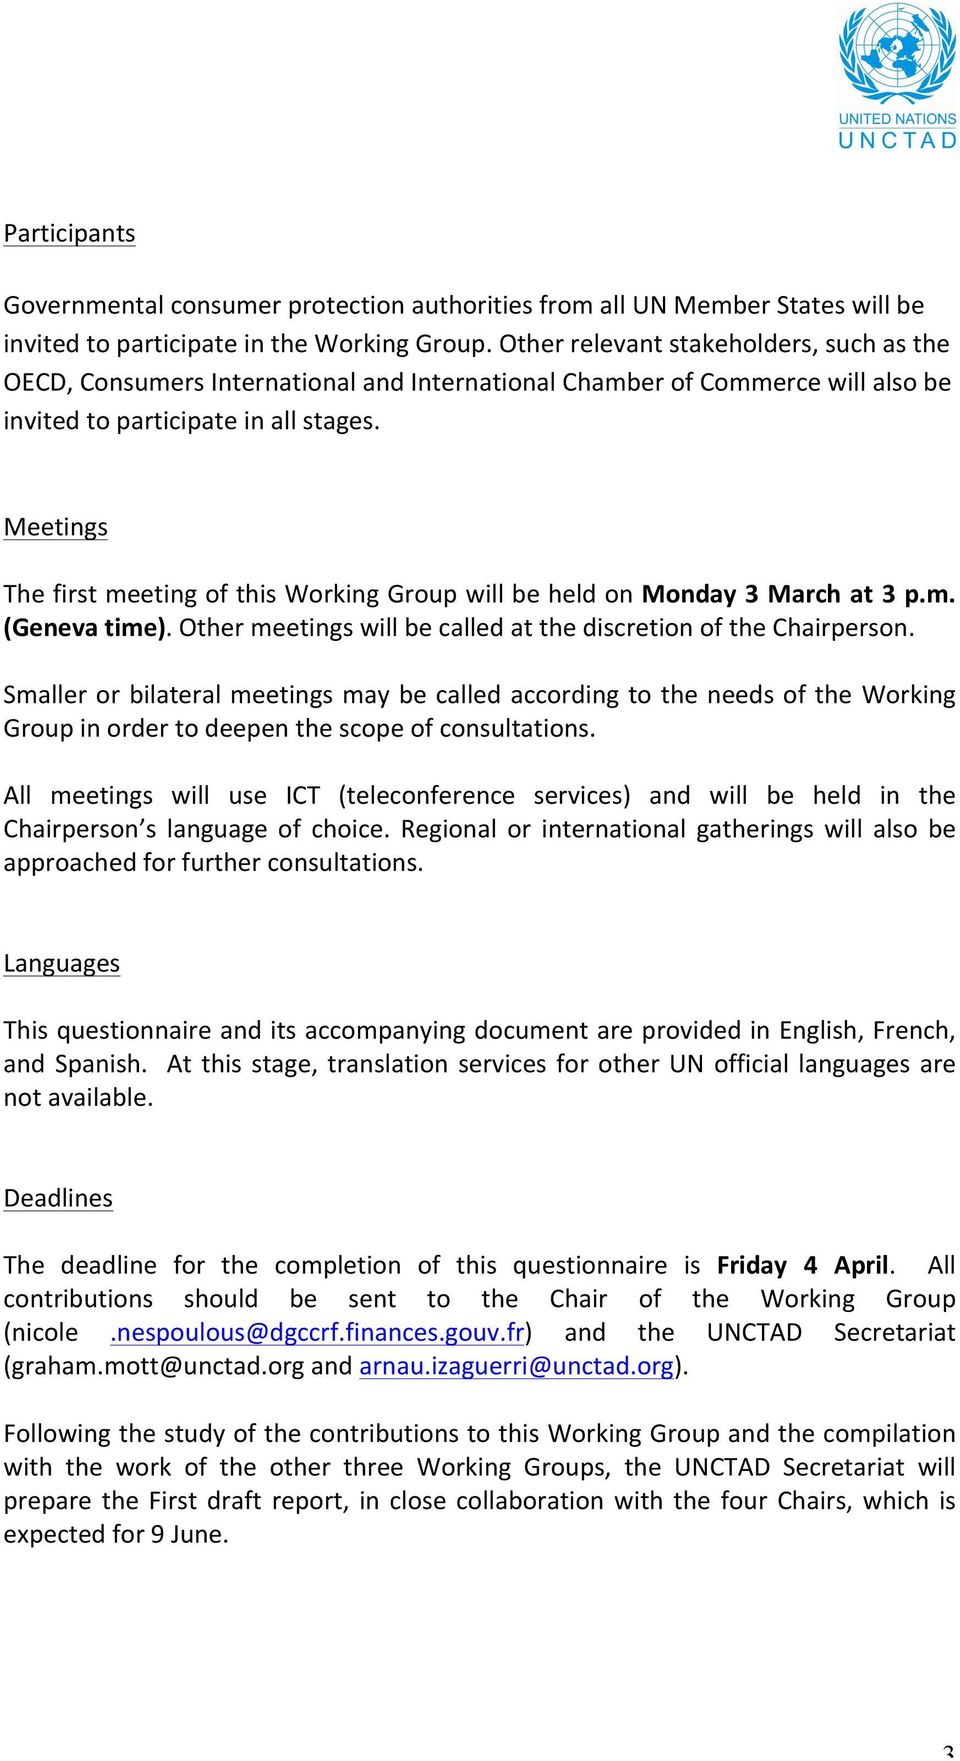 Meetings The first meeting of this Working Group will be held on Monday 3 March at 3 p.m. (Geneva time). Other meetings will be called at the discretion of the Chairperson.